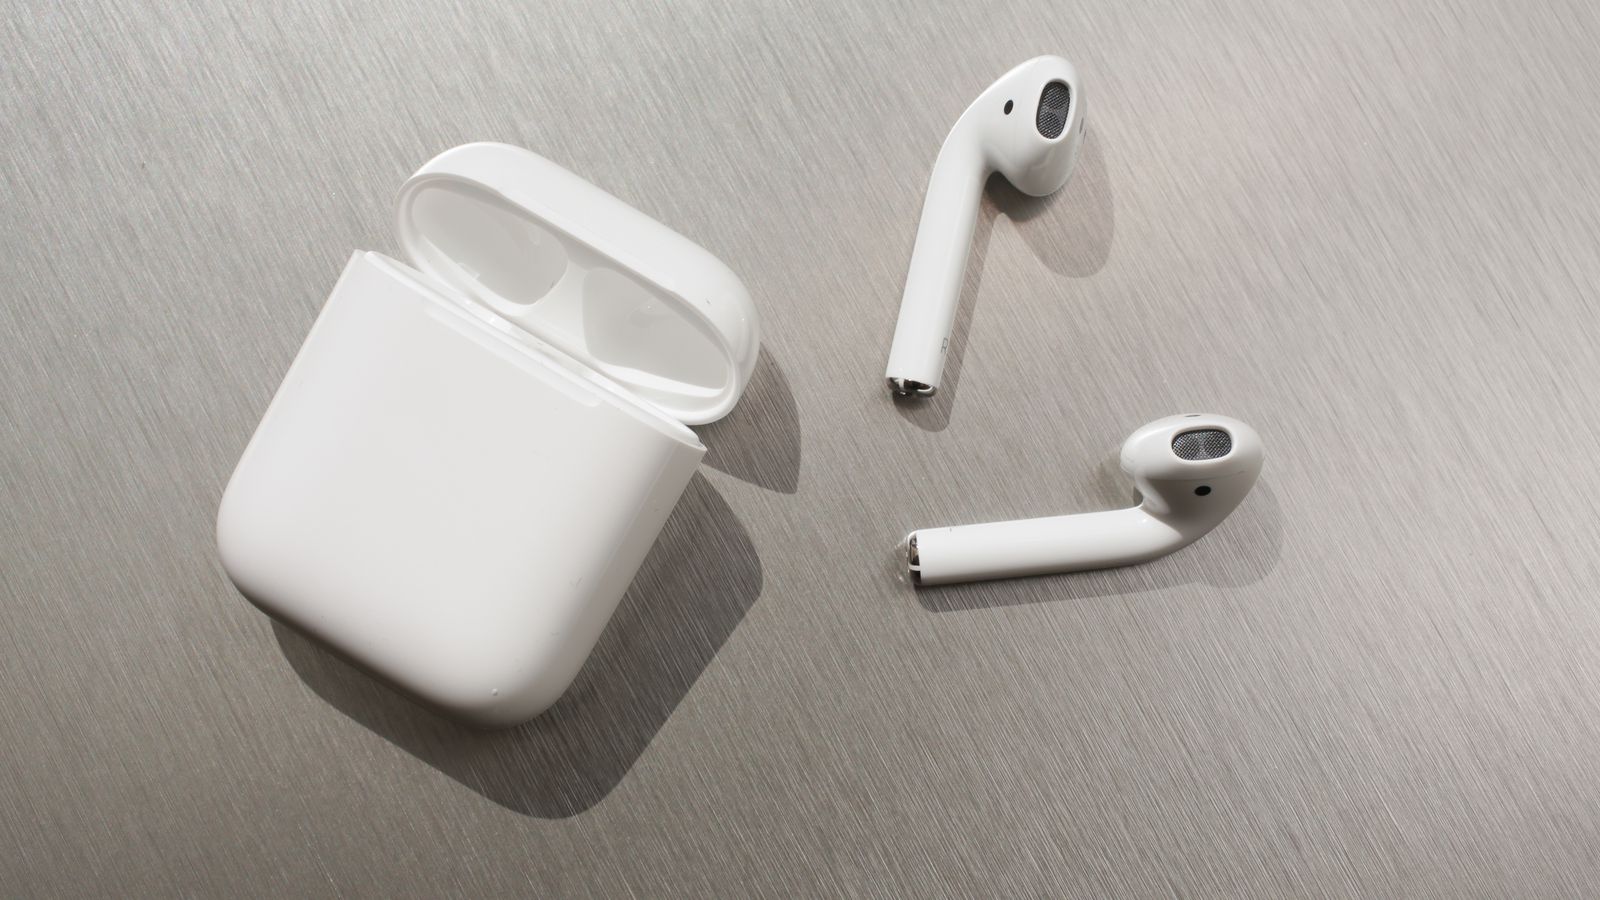 Apple Says AirPods Are 'Incredibly Popular' as Availability Remains Limited